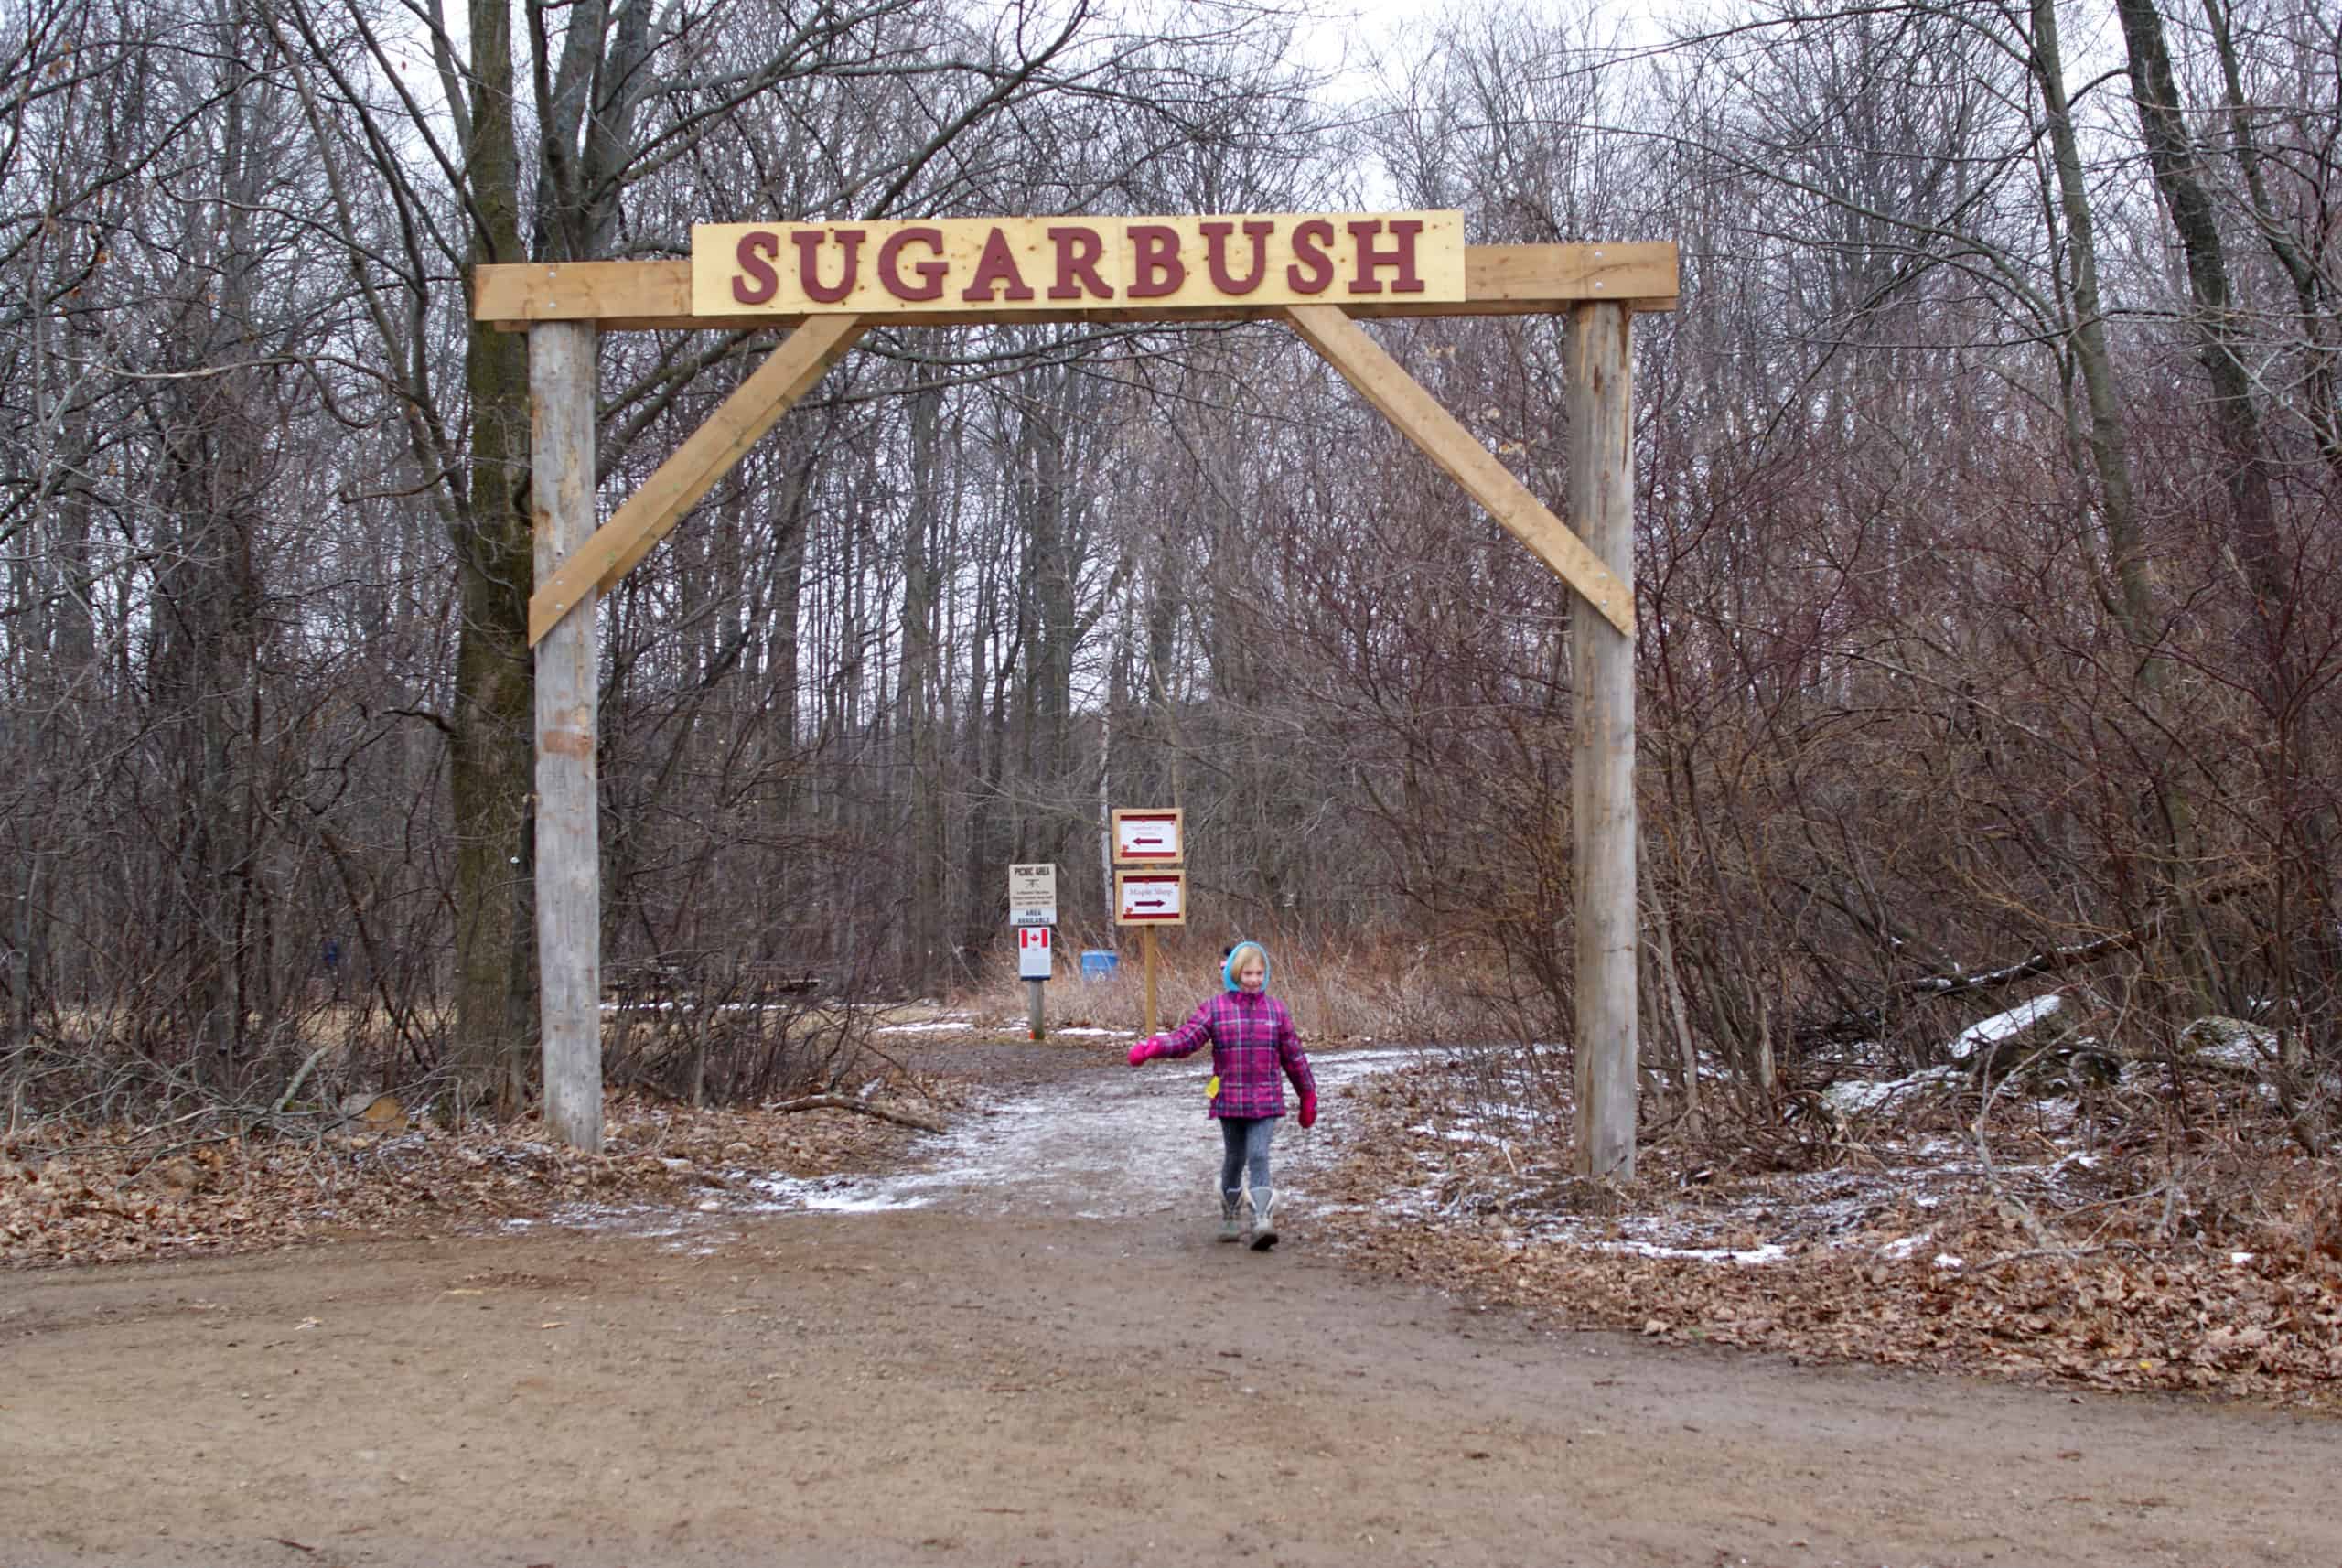 archway with Sugarbush on it and a young person walking through it with trees in the background